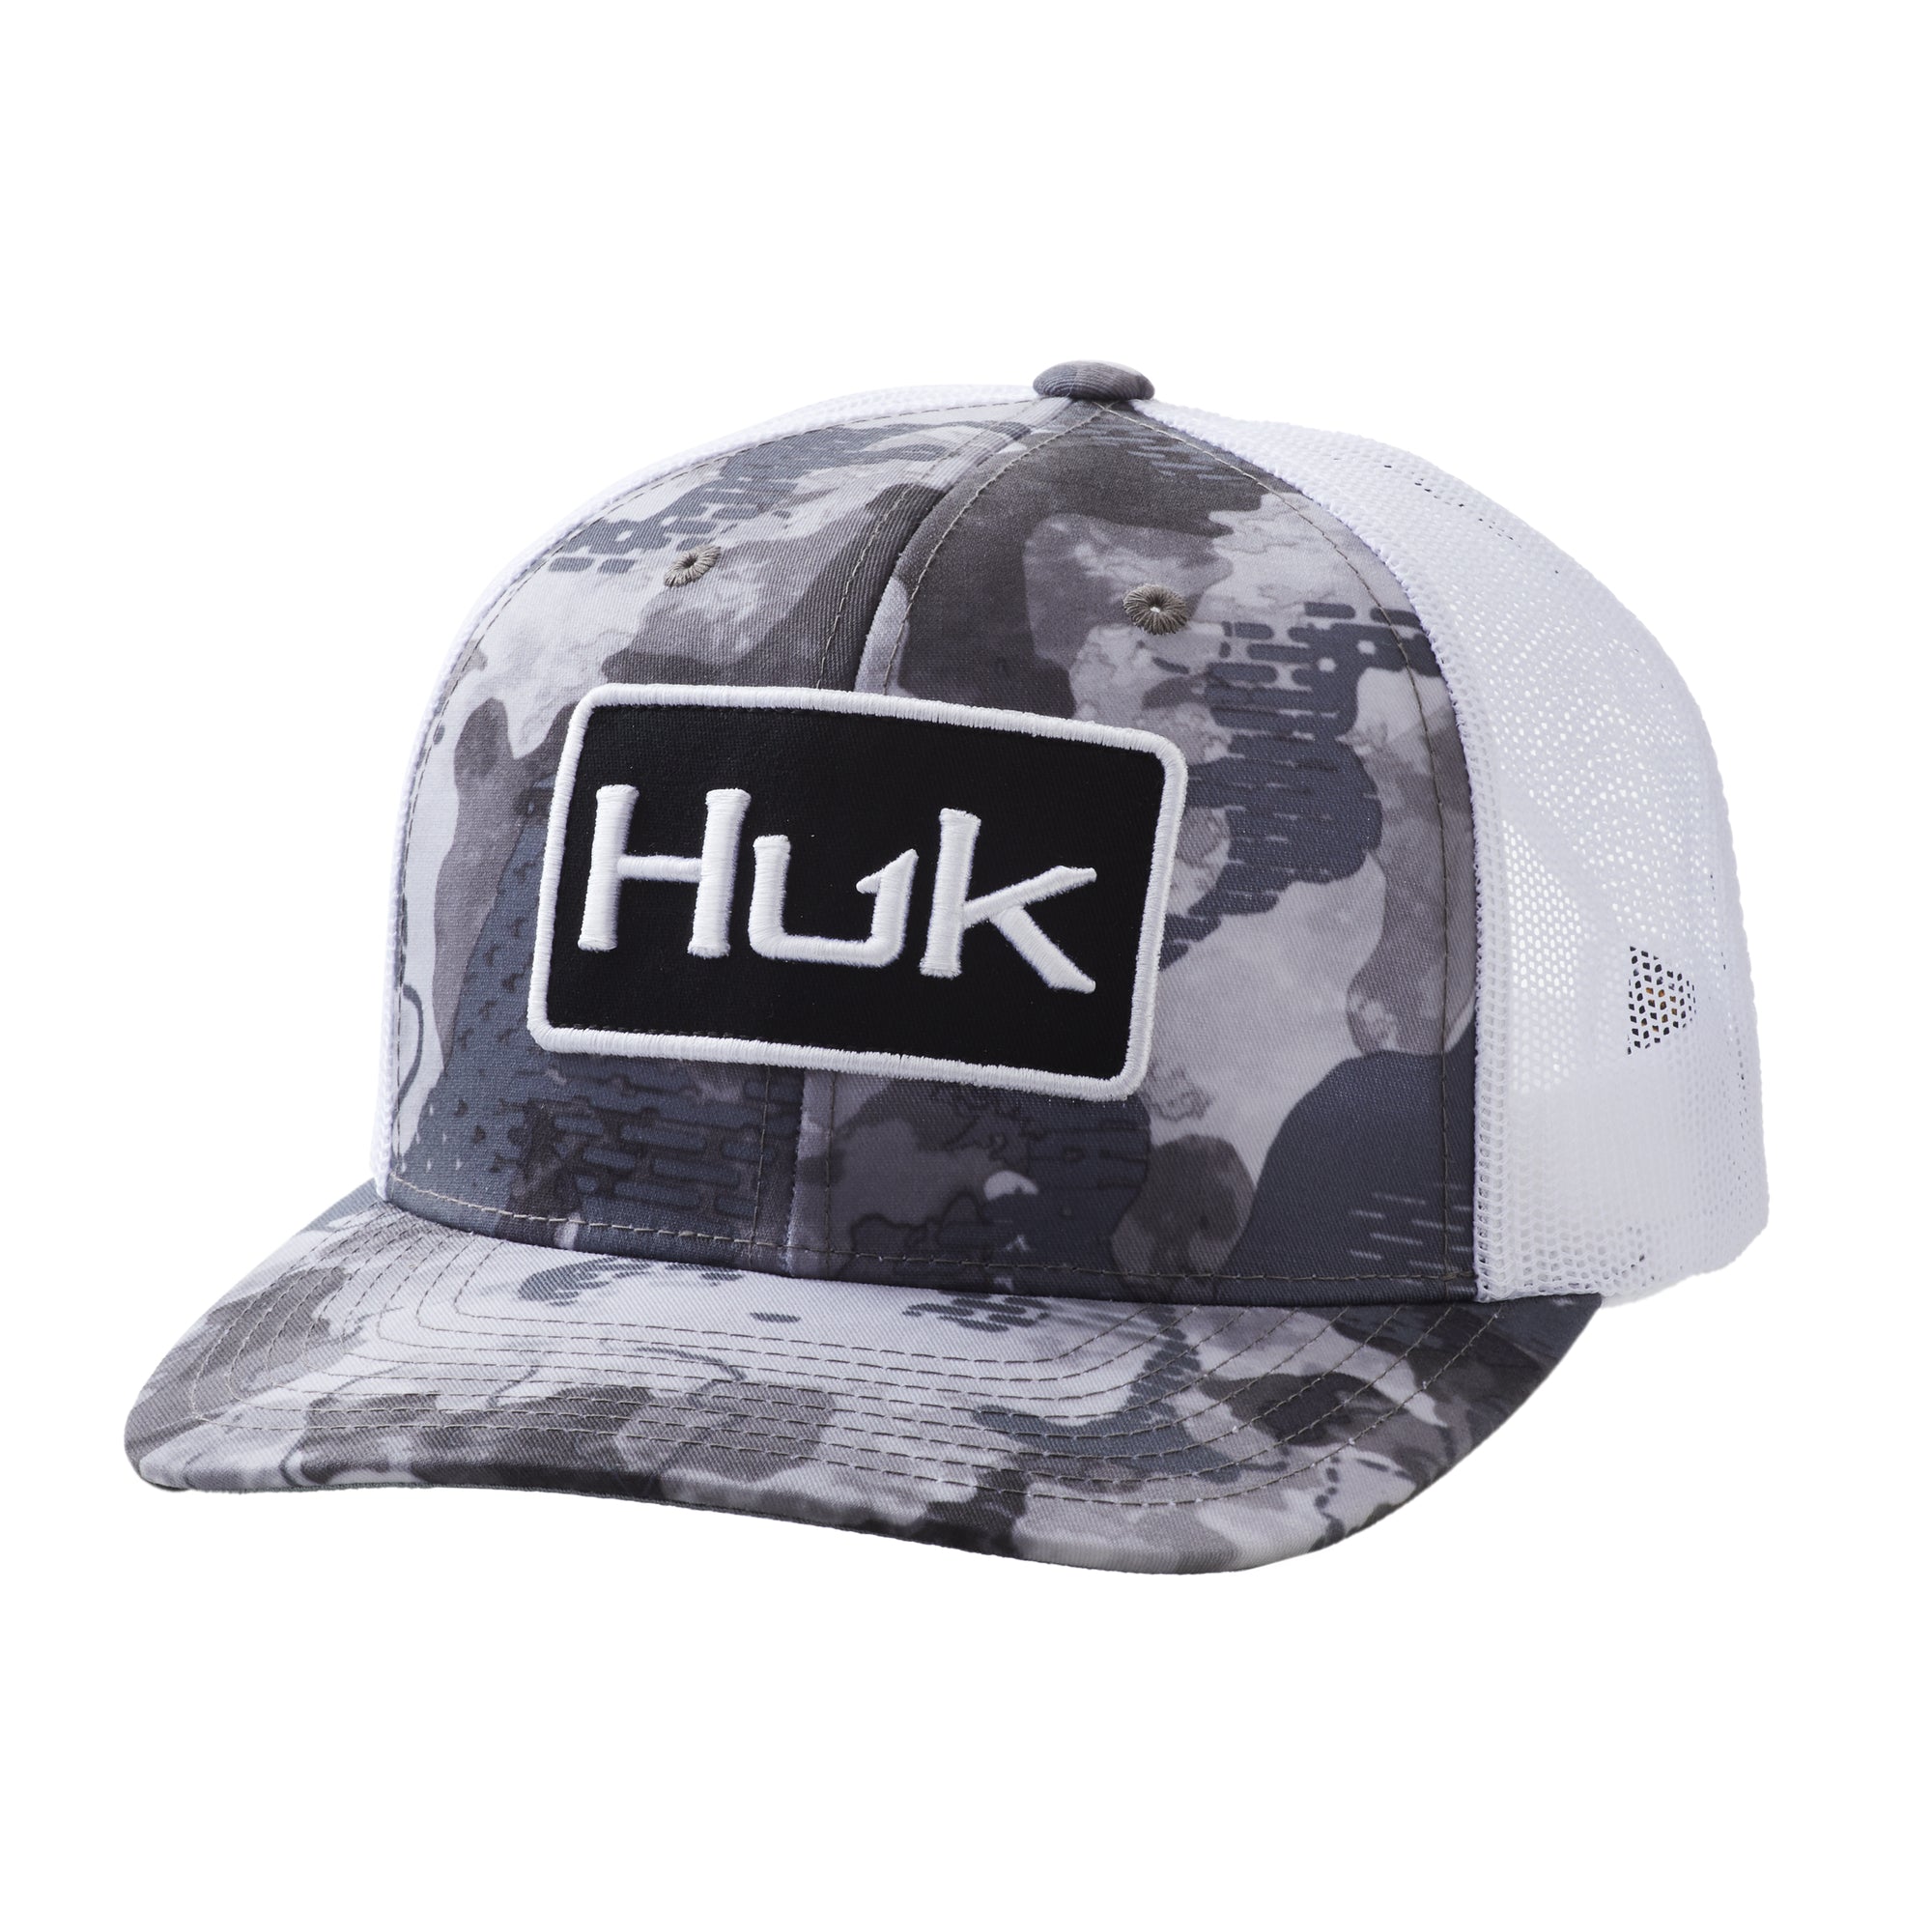 Huk Huk'd Up Refraction Fishing Hat – Natural Sports - The Fishing Store